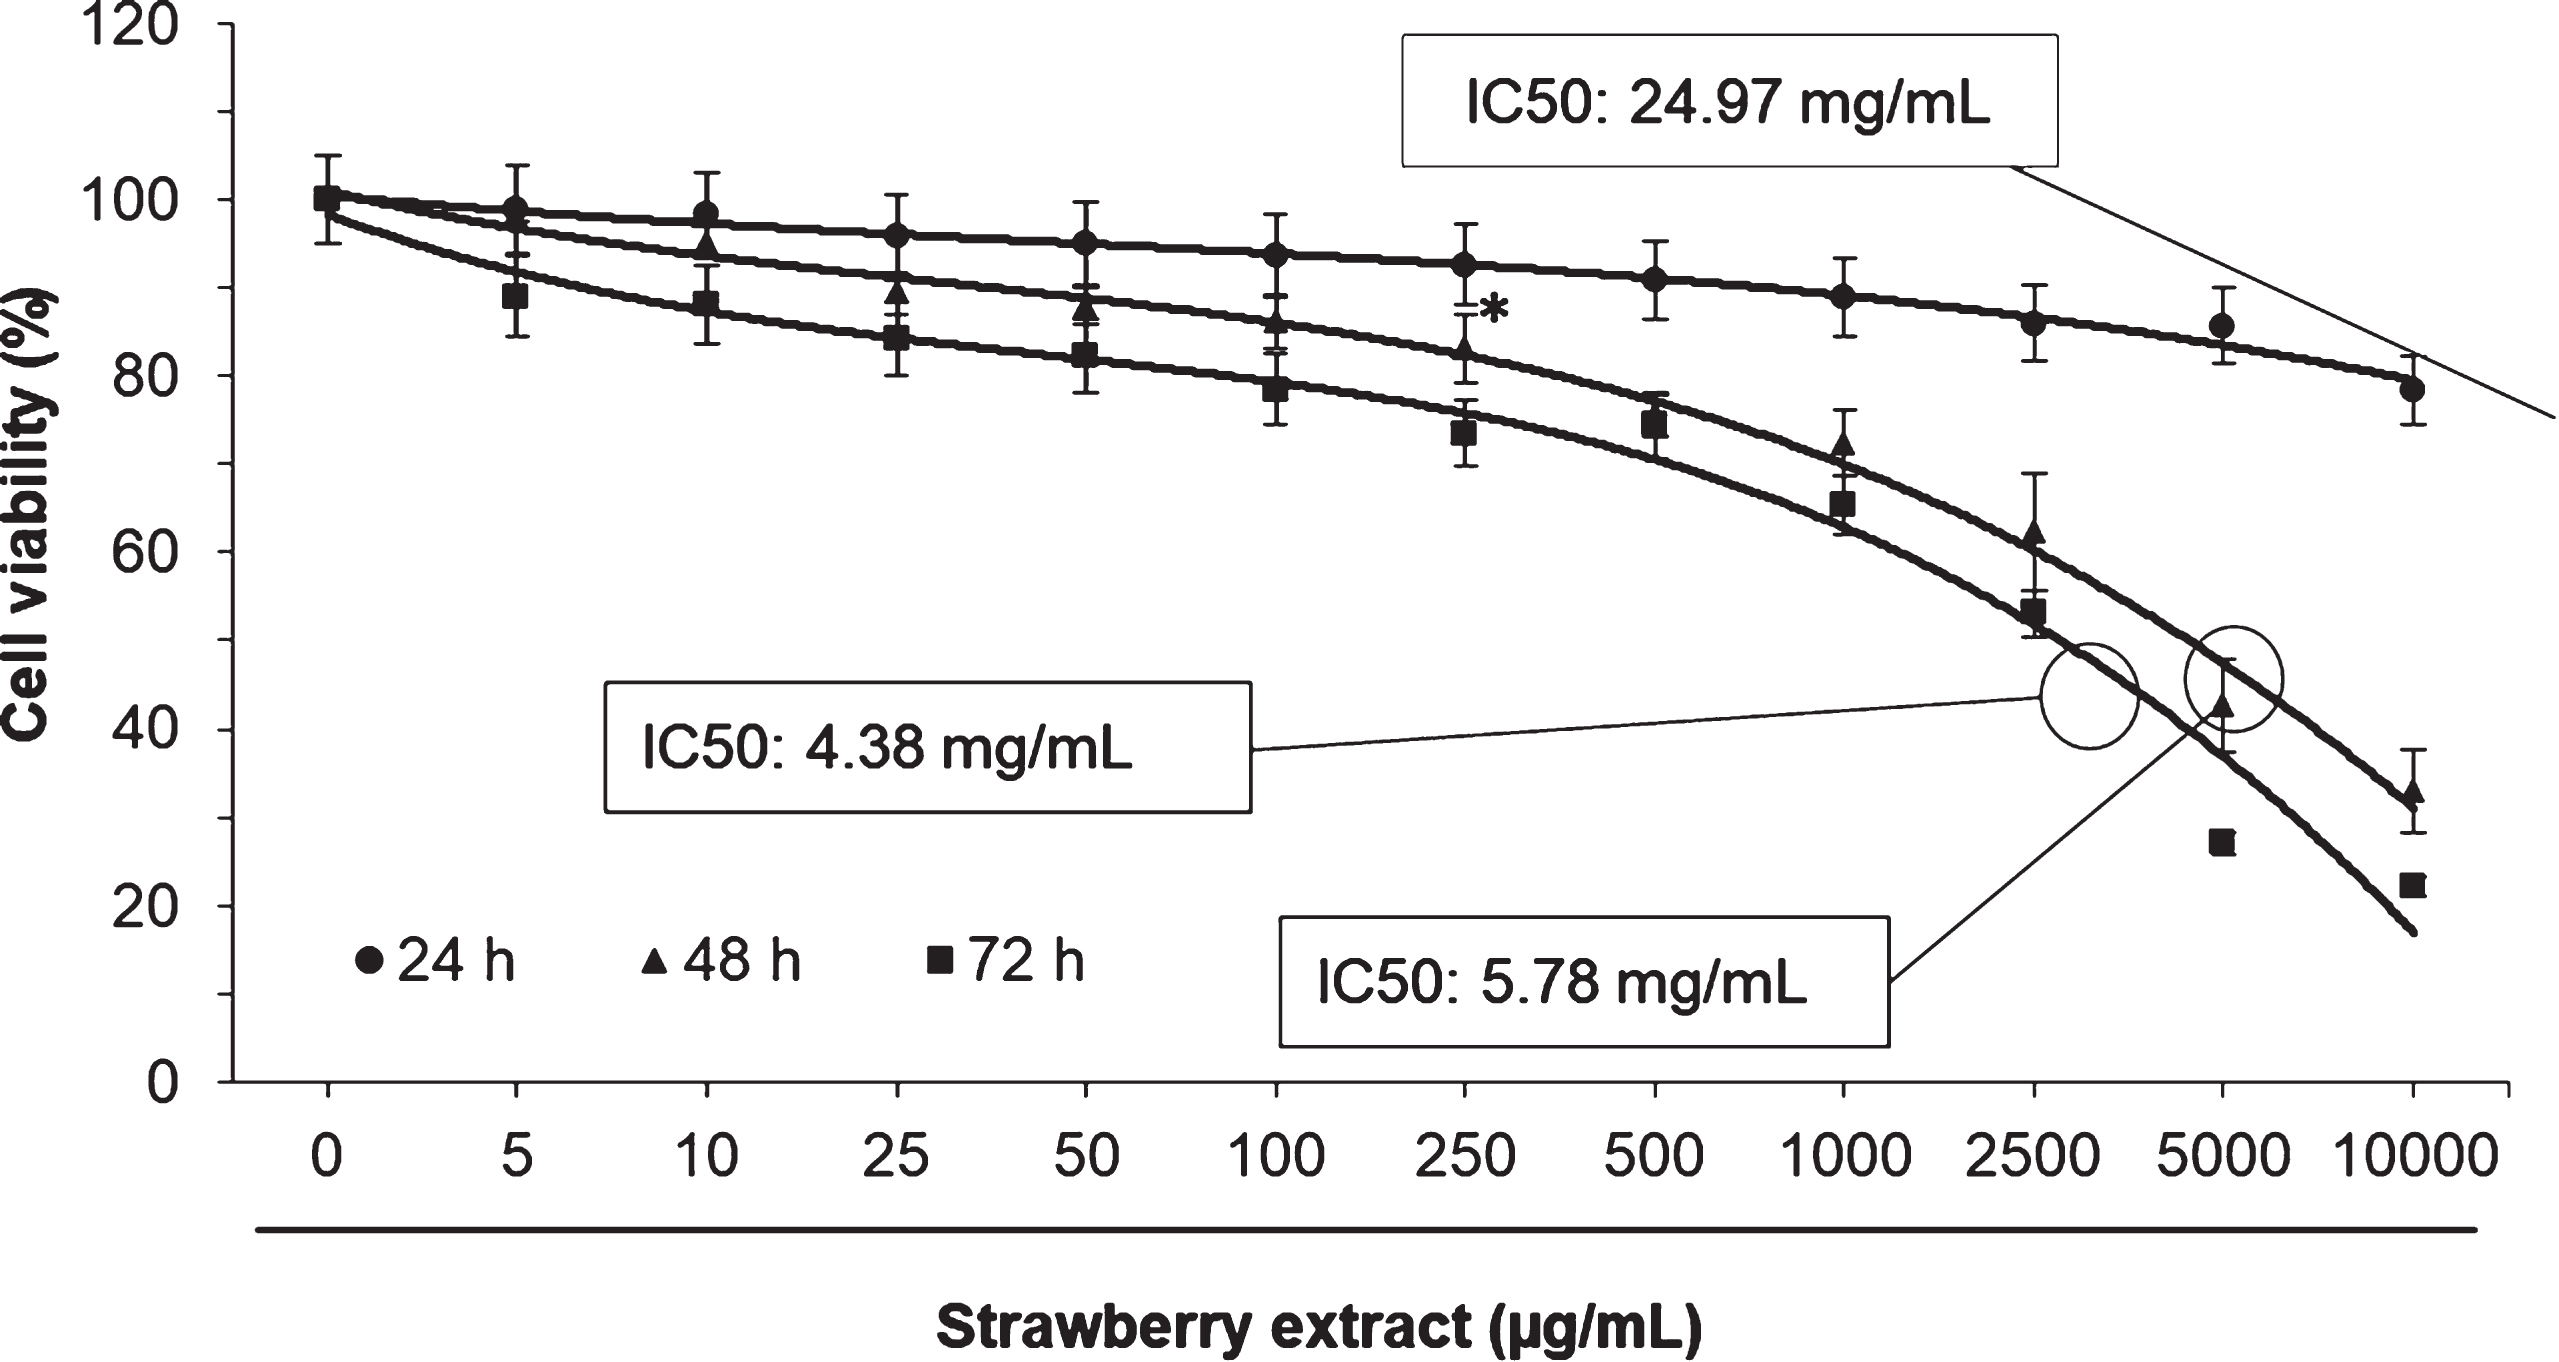 Effects of strawberry extract on 3T3-L1 cells viability as measured by the MTT assay. Cells were treated with the indicated concentration for 24, 48 or 72 h. IC50 indicates the concentration of strawberry extract which reduces the cells viability about 50%. Values are expressed as mean±SD of three independent experiments (n = 3). The asterisk indicates the concentrations from which significant differences (p < 0.05) were observed compared to the control.